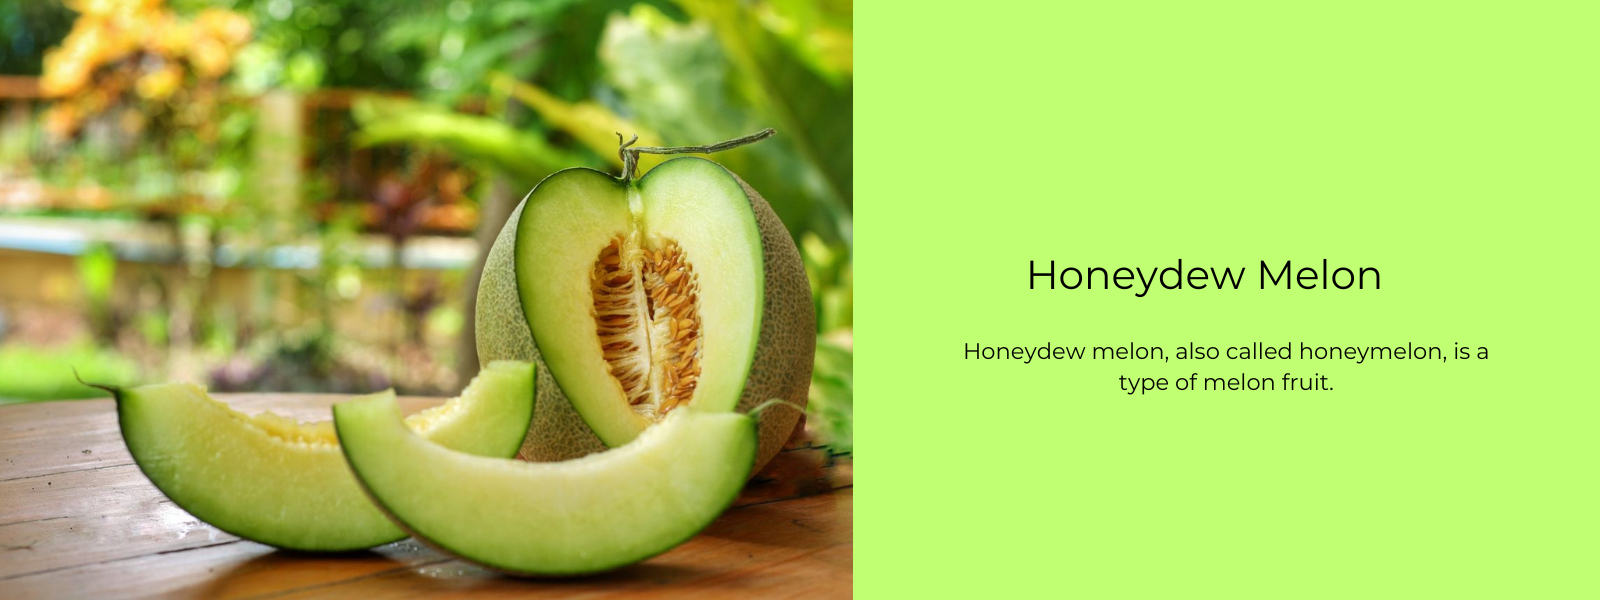 Honeydew Melon – Health Benefits, Uses and Important Facts